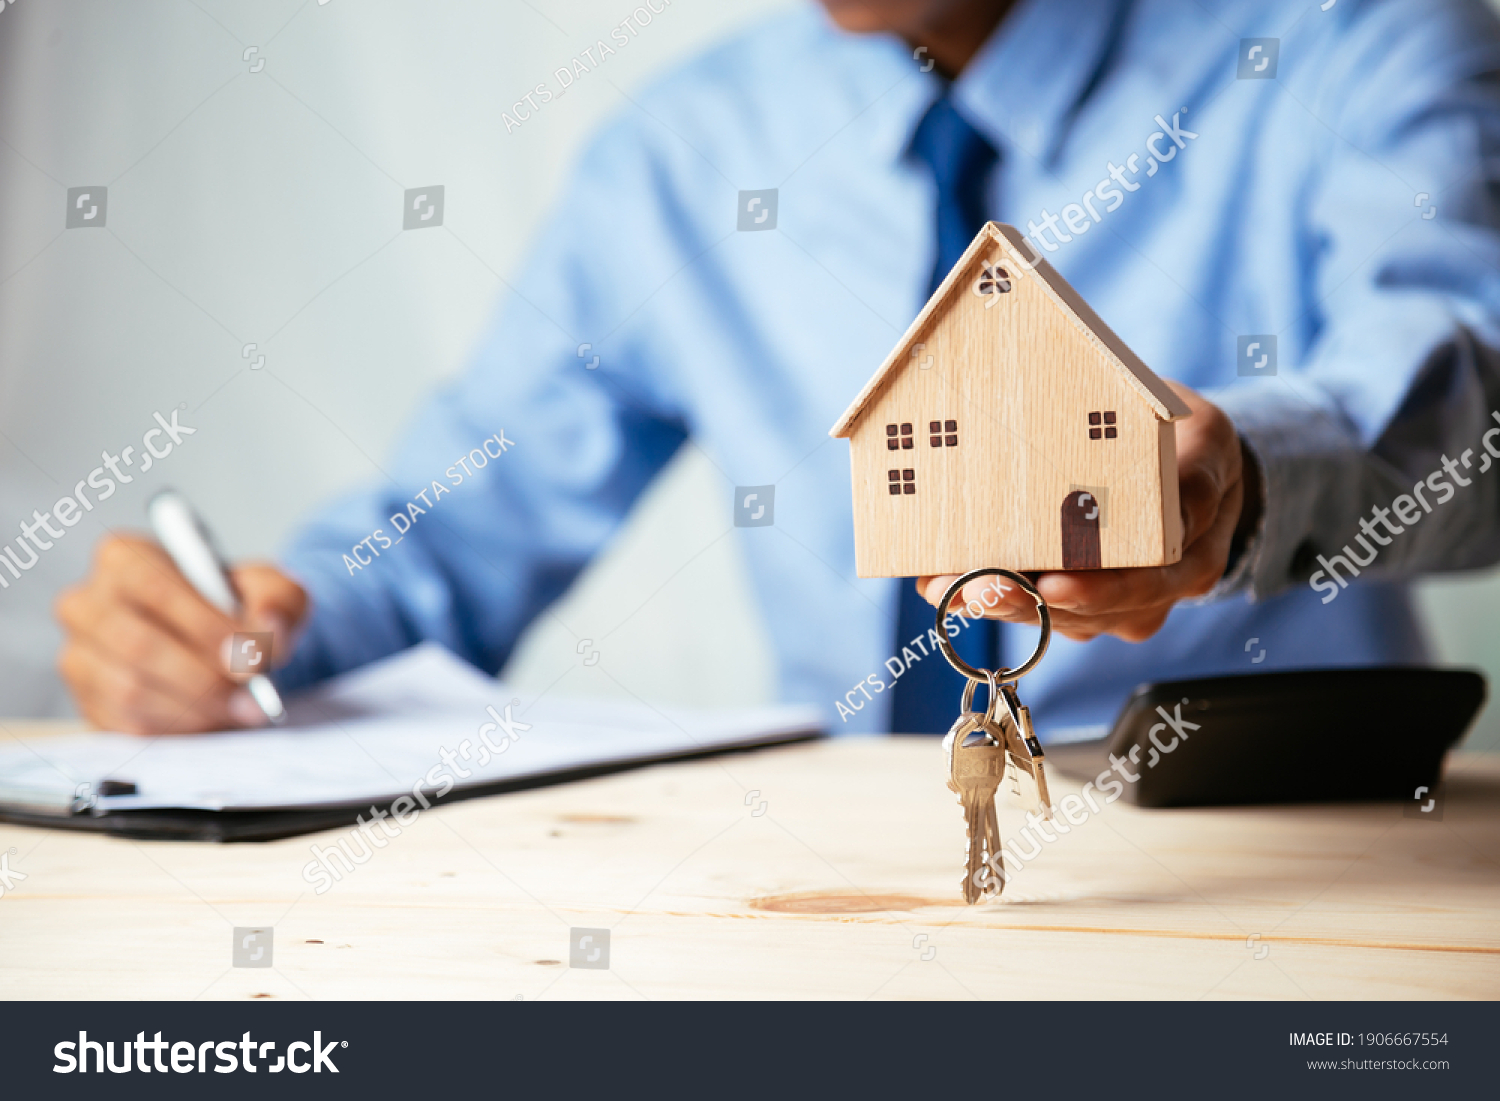 House model with real estate agent and customer discussing for contract to buy house, insurance or loan real estate,real estate concept. #1906667554